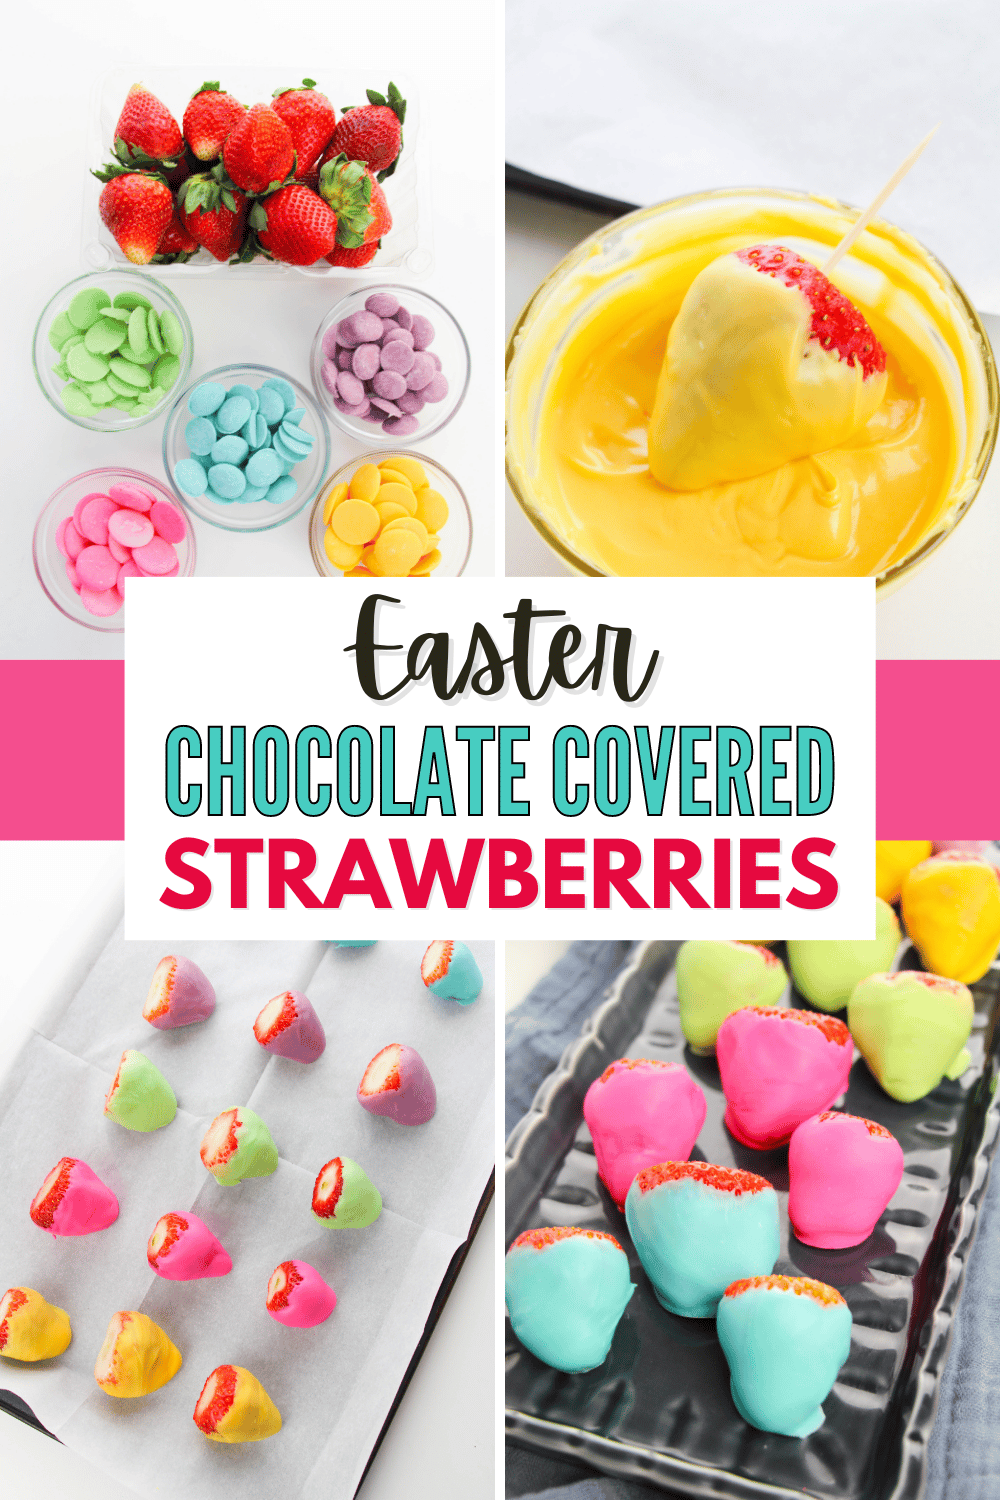 These Easter Chocolate Covered Strawberries make a wonderful treat for any occasion. They are delicious and fun to make. #easterchocolatecoveredstrawberries #chocolatecoveredstrawberries #easterdessert #easterstrawberries #eastertreat via @wondermomwannab